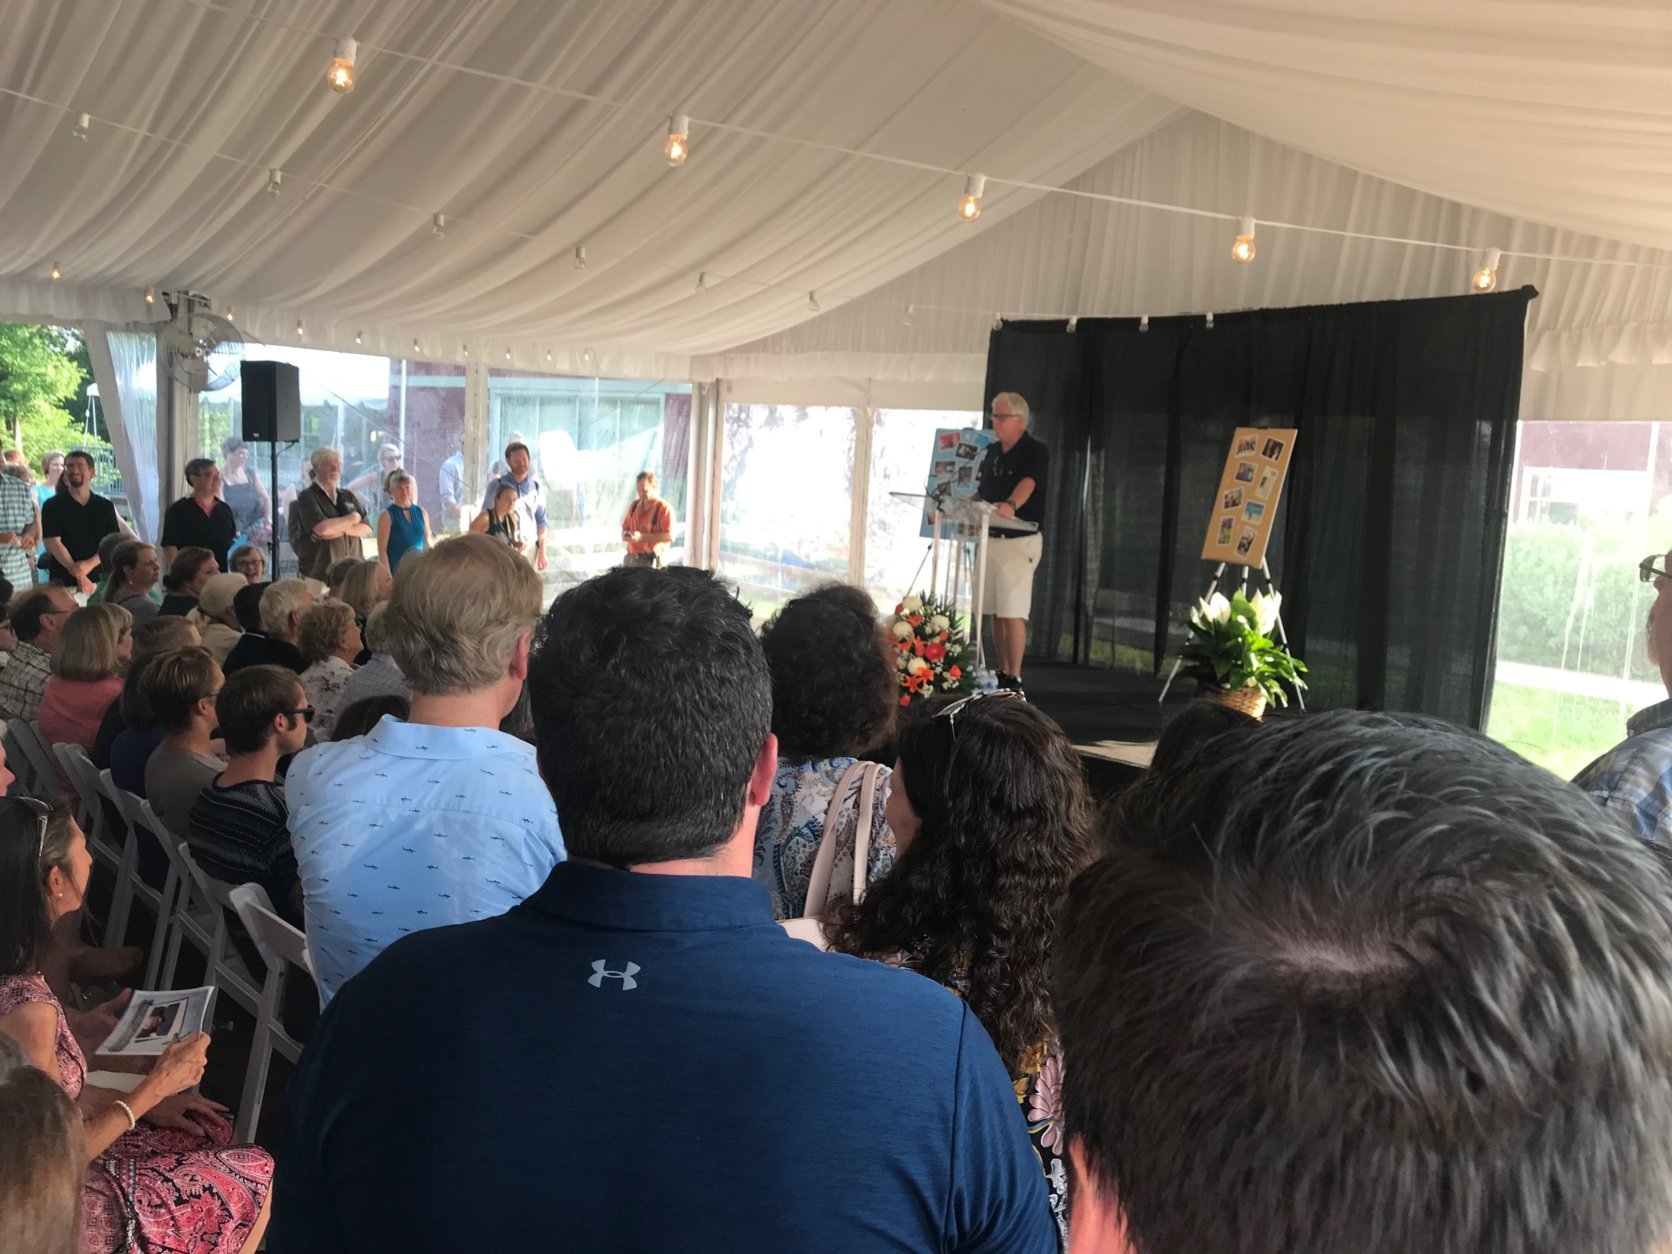 Rob Hiaasen, one of five Capital Gazette staff members killed in last week's newsroom shooting in Annapolis, Maryland, was remembered Monday night by family and friends in a Celebration of Life service. (WTOP/Dick Uliano)